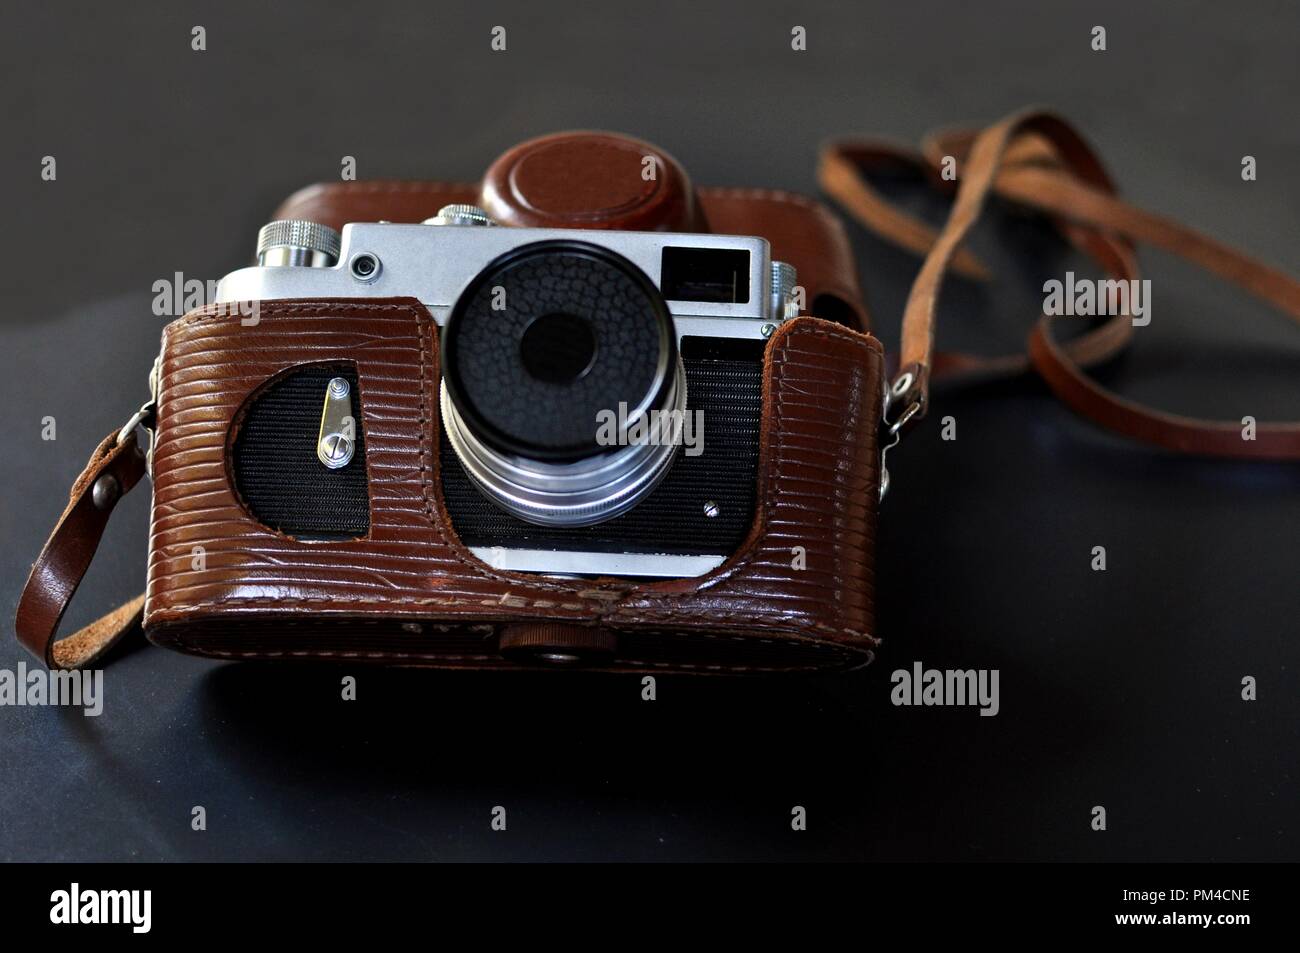 Vintage old film camera with brown leather case, on black background Stock Photo